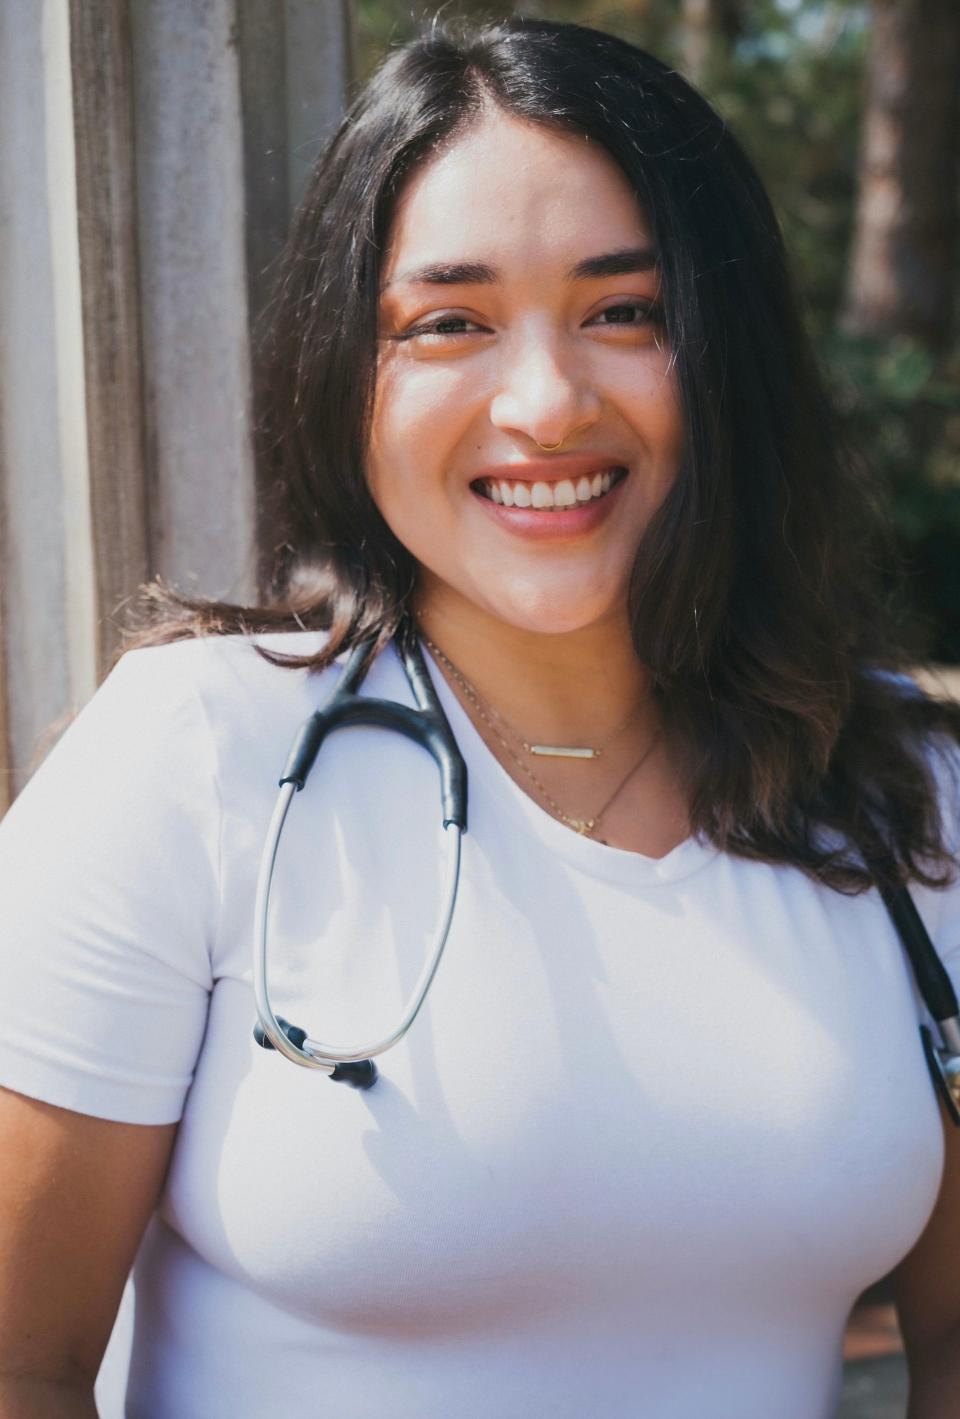 Indio native Cristal Salcido is completing her doctorate degree in naturopathic medicine and master's degree in counseling psychology at Bastyr University.